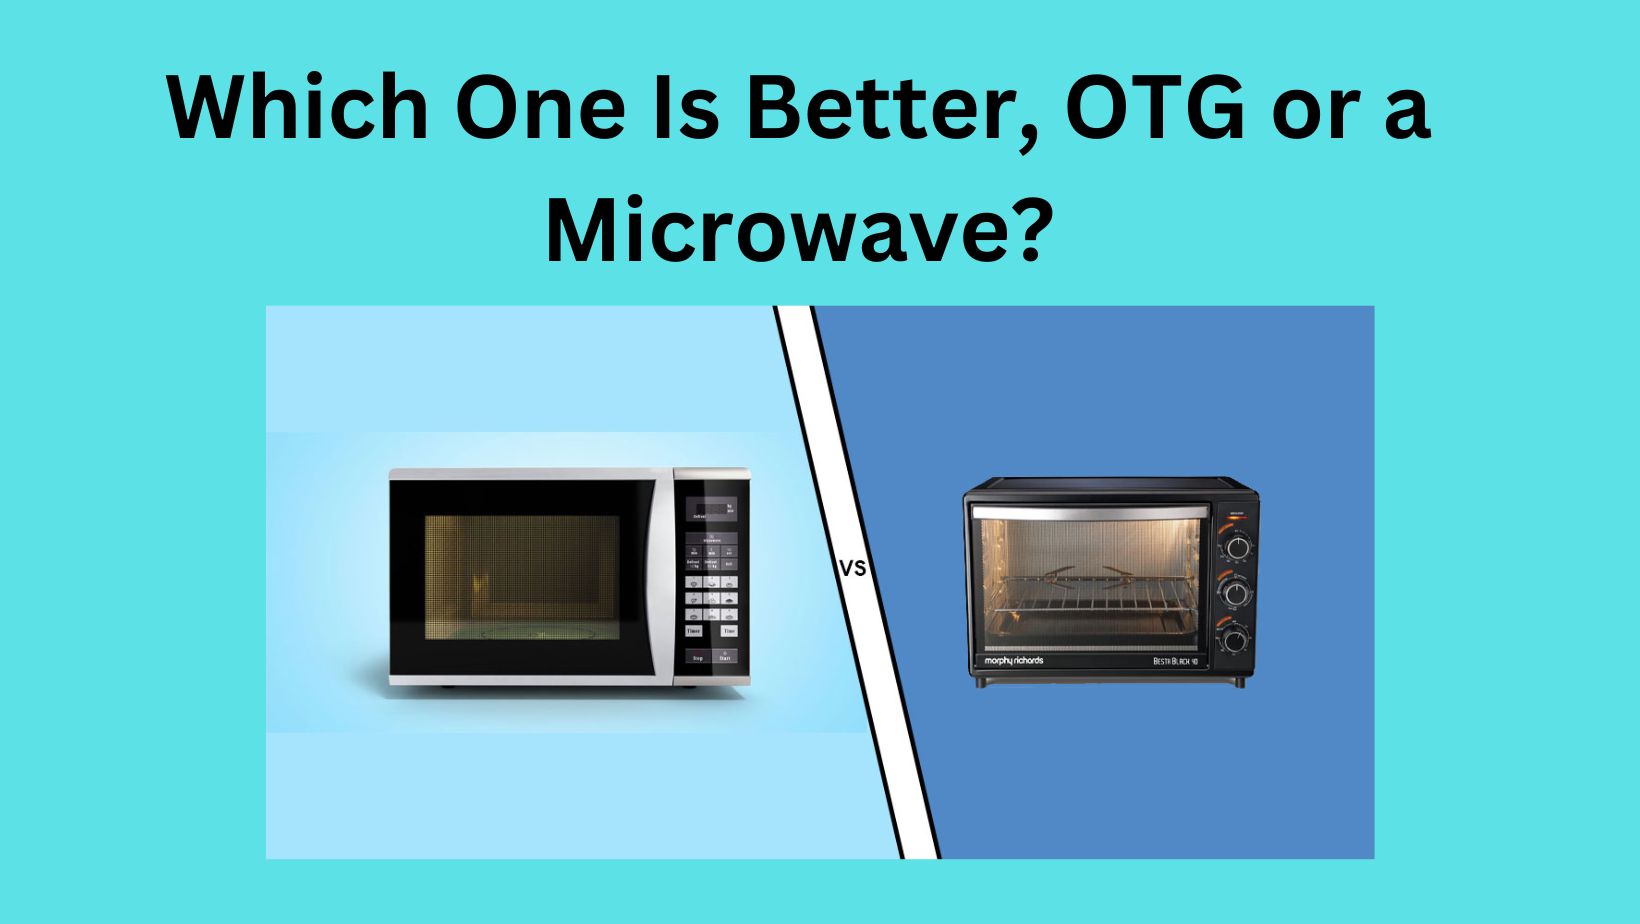 Which One Is Better, OTG or a Microwave?